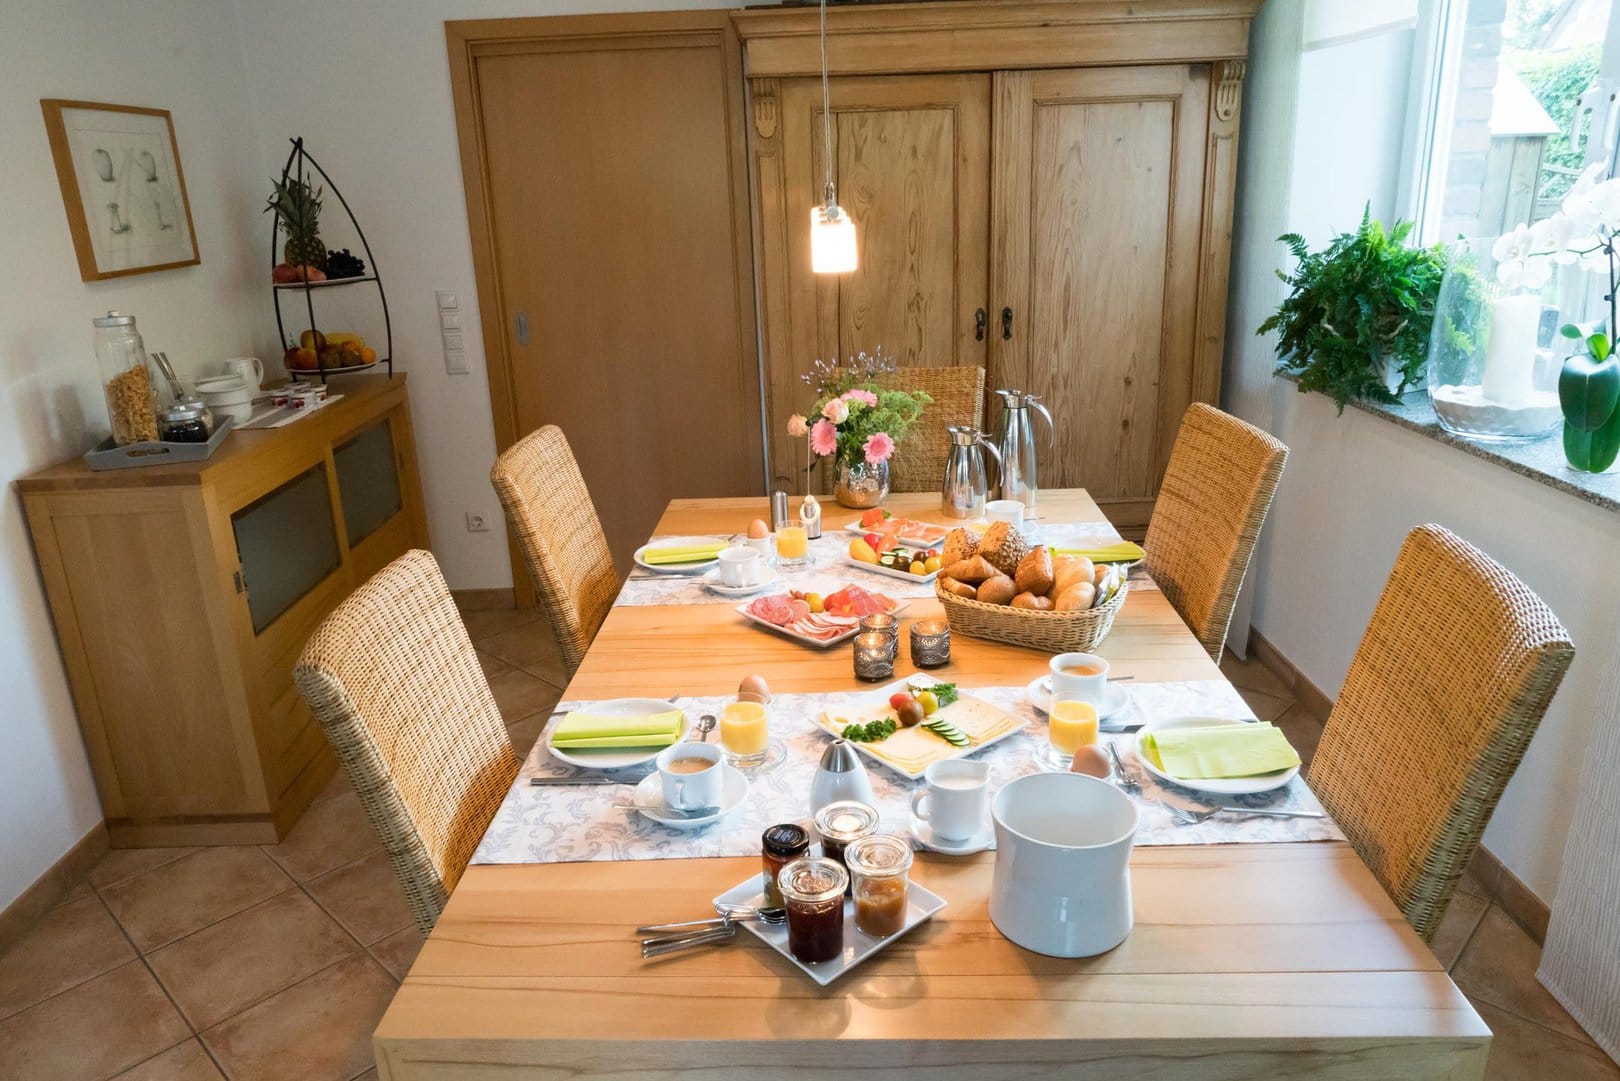 A wooden table set for four people with a selection of breads, meat and cheese, as well as various jams, yoghurts and coffee. The table stands in a bright room. In the background you can see chest of drawers which is set with mueslis and fruits.